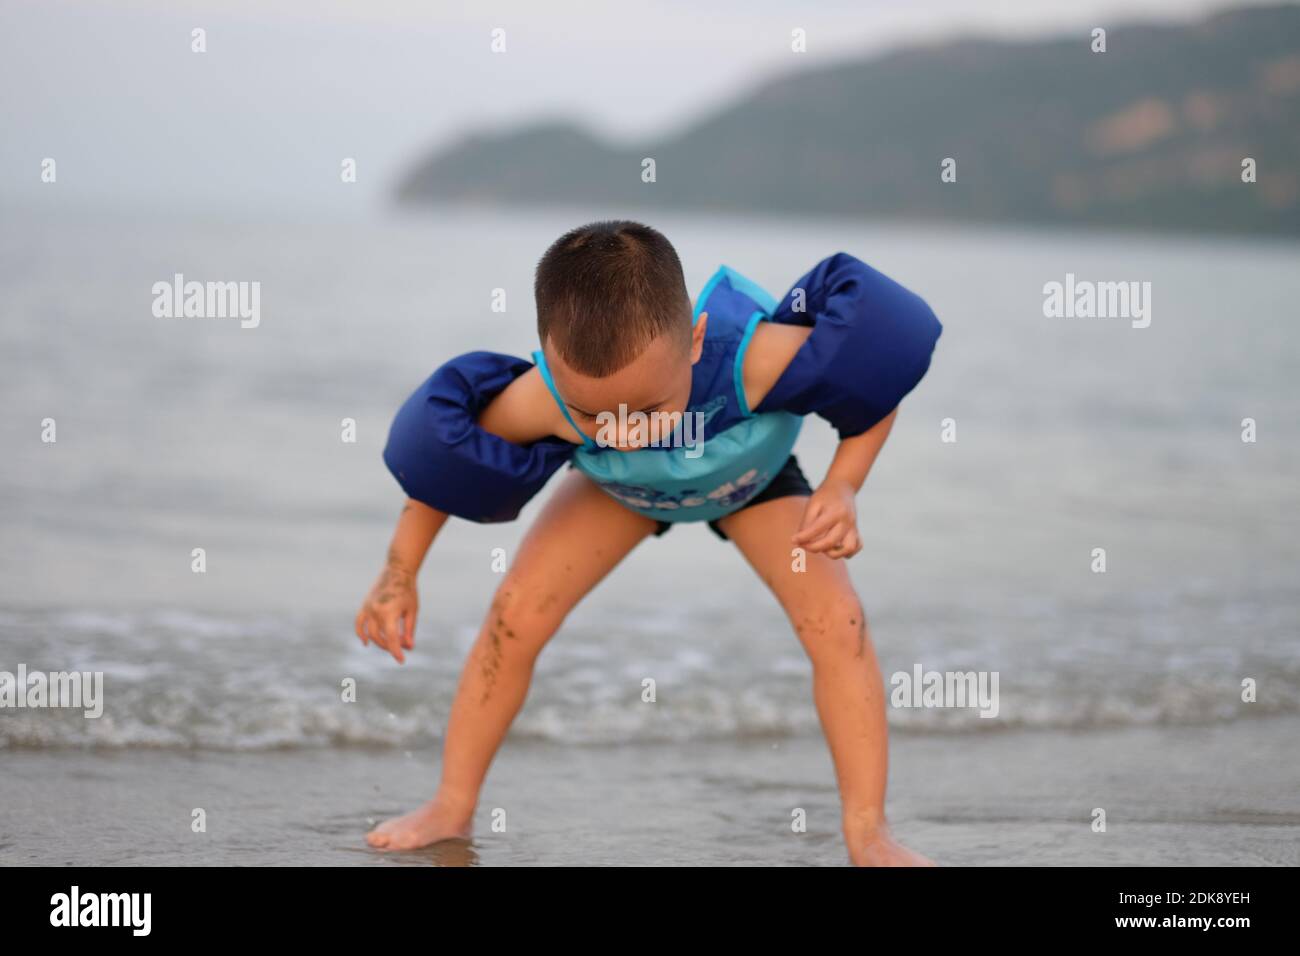 Boy Wearing Water Wings While Playing On Shore At Beach Stock Photo